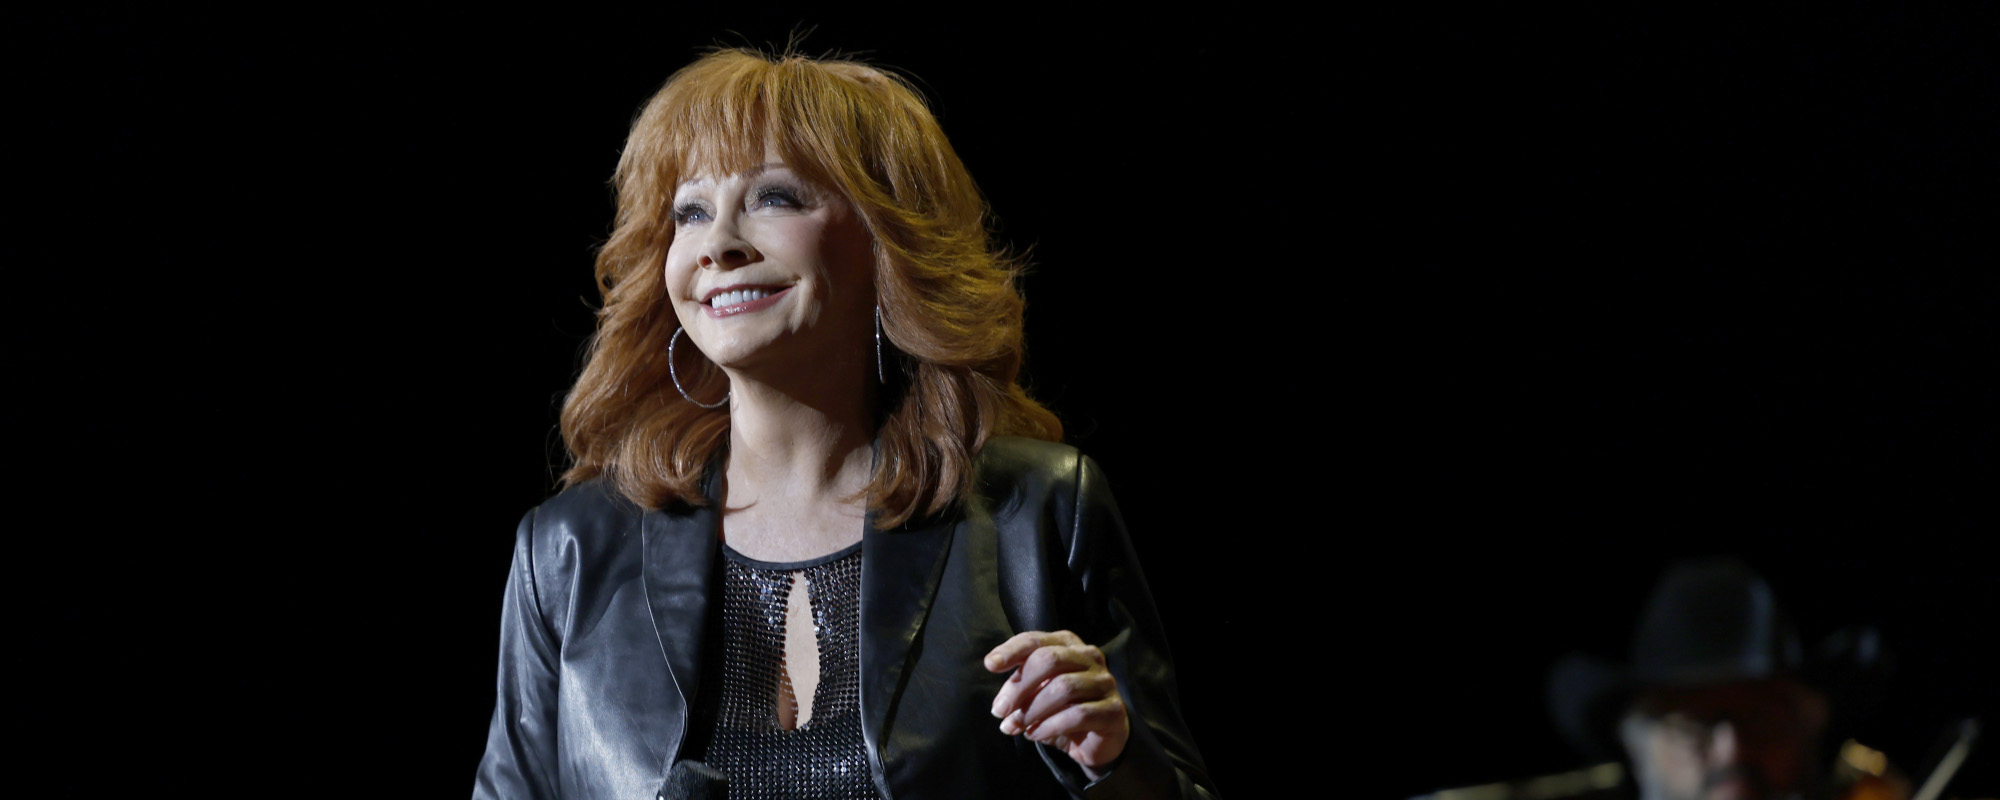 Watch a 19-Year-Old Reba McEntire Get Discovered After Her First-Ever National Anthem Performance 50 Years Ago